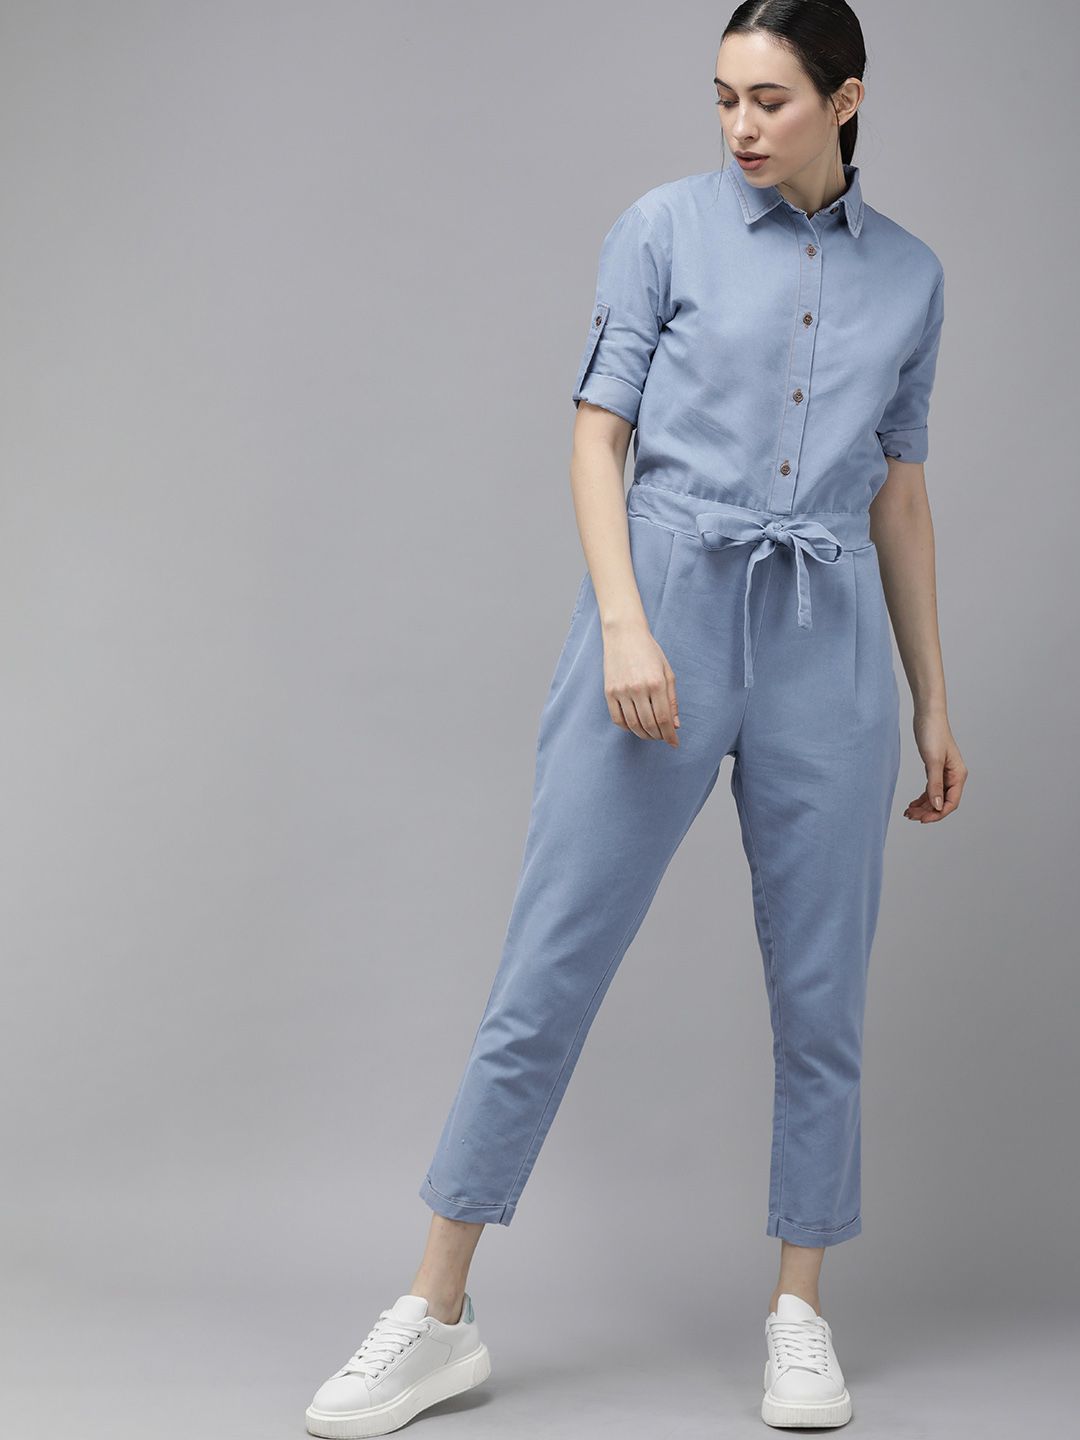 VOXATI Blue Checked Basic Jumpsuit Price in India